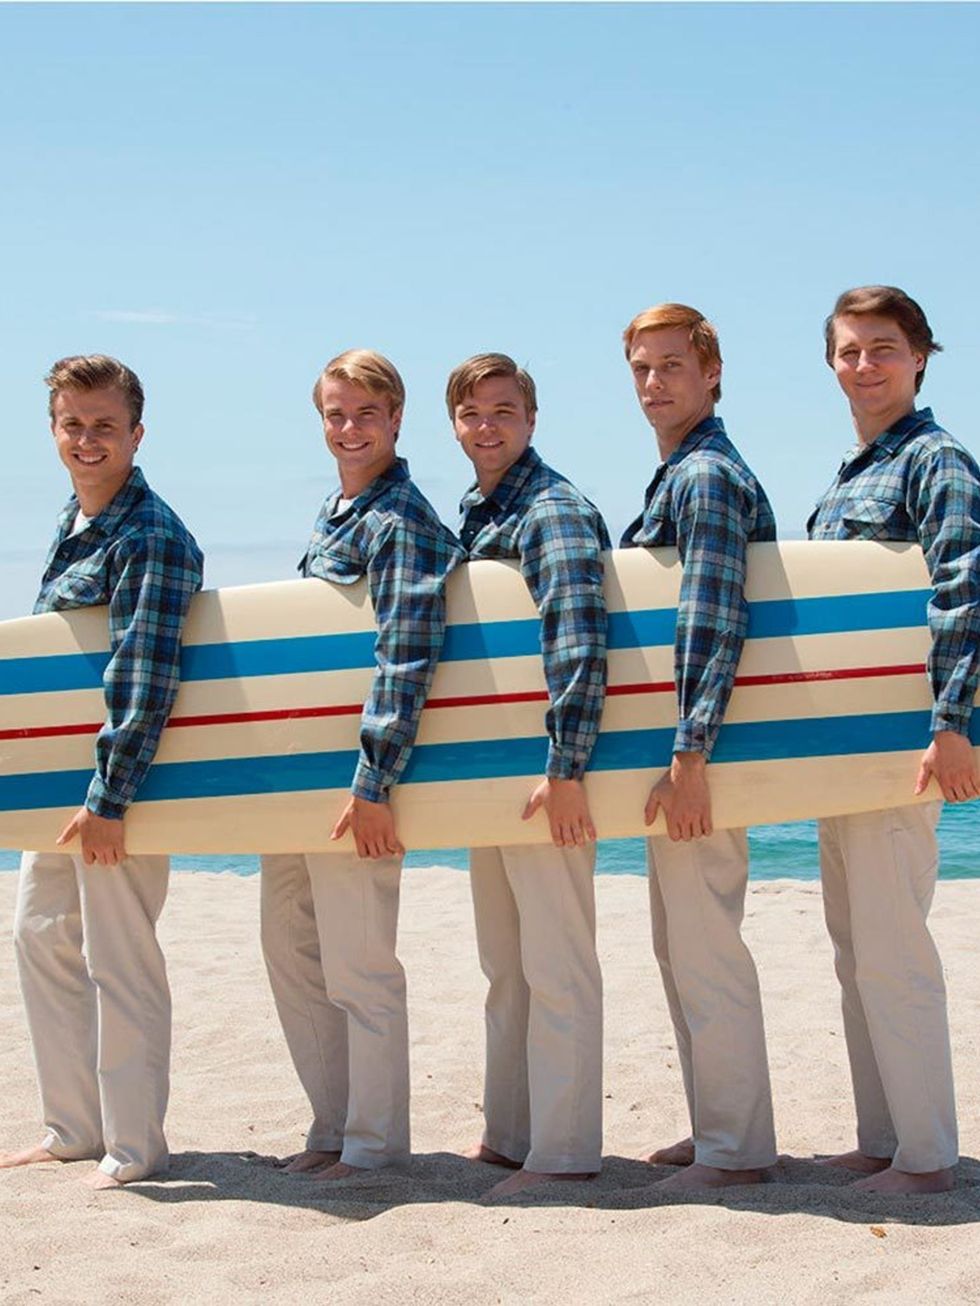 <p>FILM: Love & Mercy</p>

<p>So you love The Beach Boys, right? If you answered yes, you may skip the next two sentences. If no: sorry, Good Vibrations, God Only Knows, Wouldnt It Be Nice? See, you do. Now that were all on the same page, youll all app